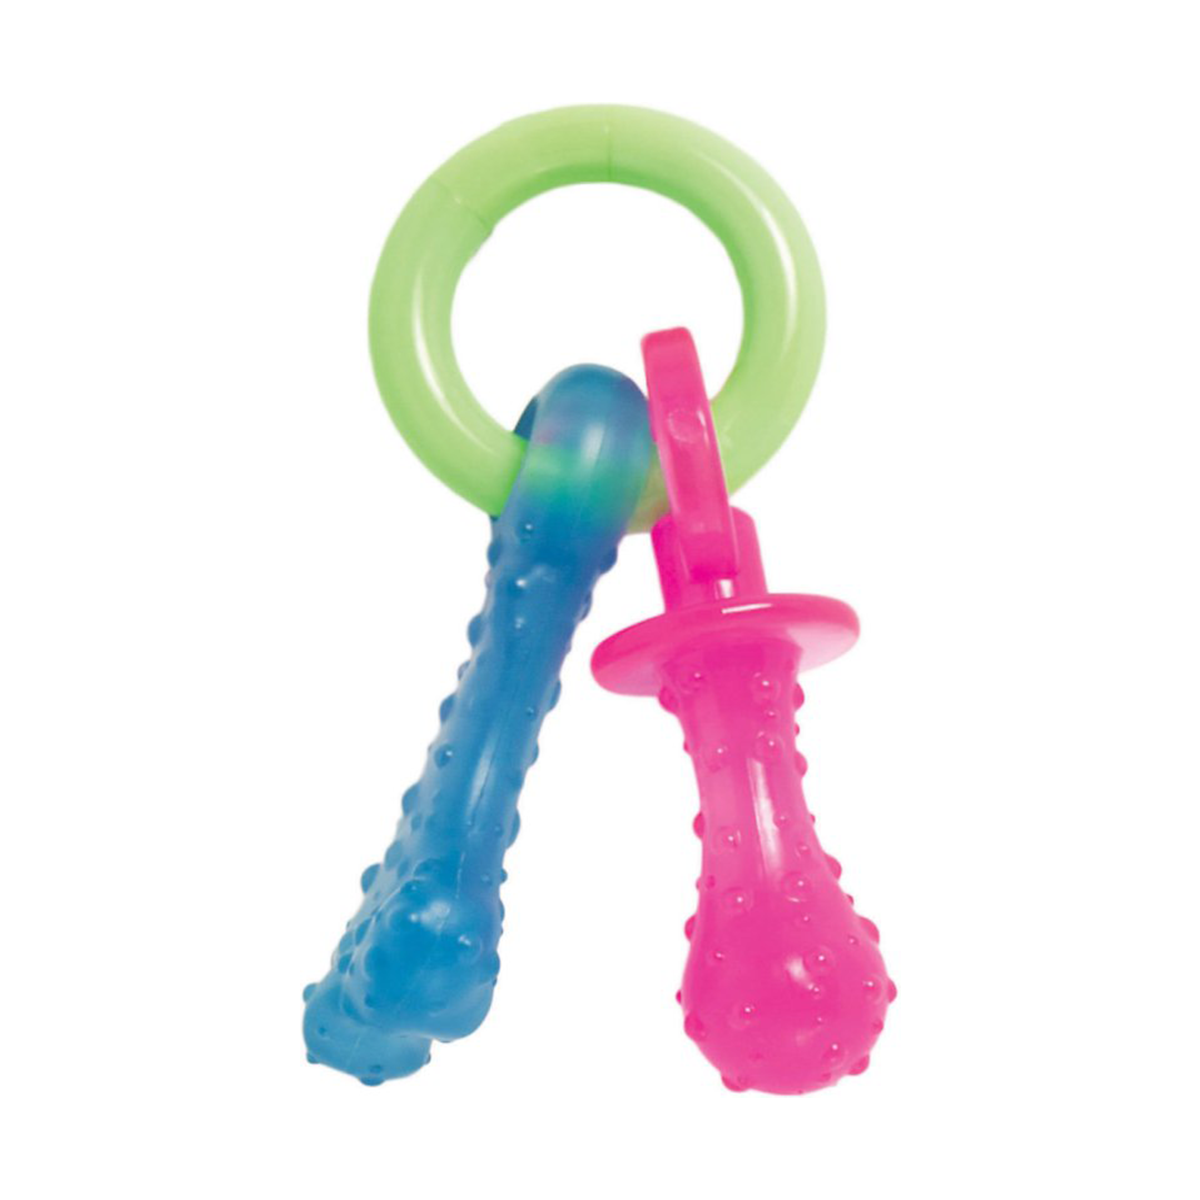 Nylabone Puppy Pacifier Teething Toy